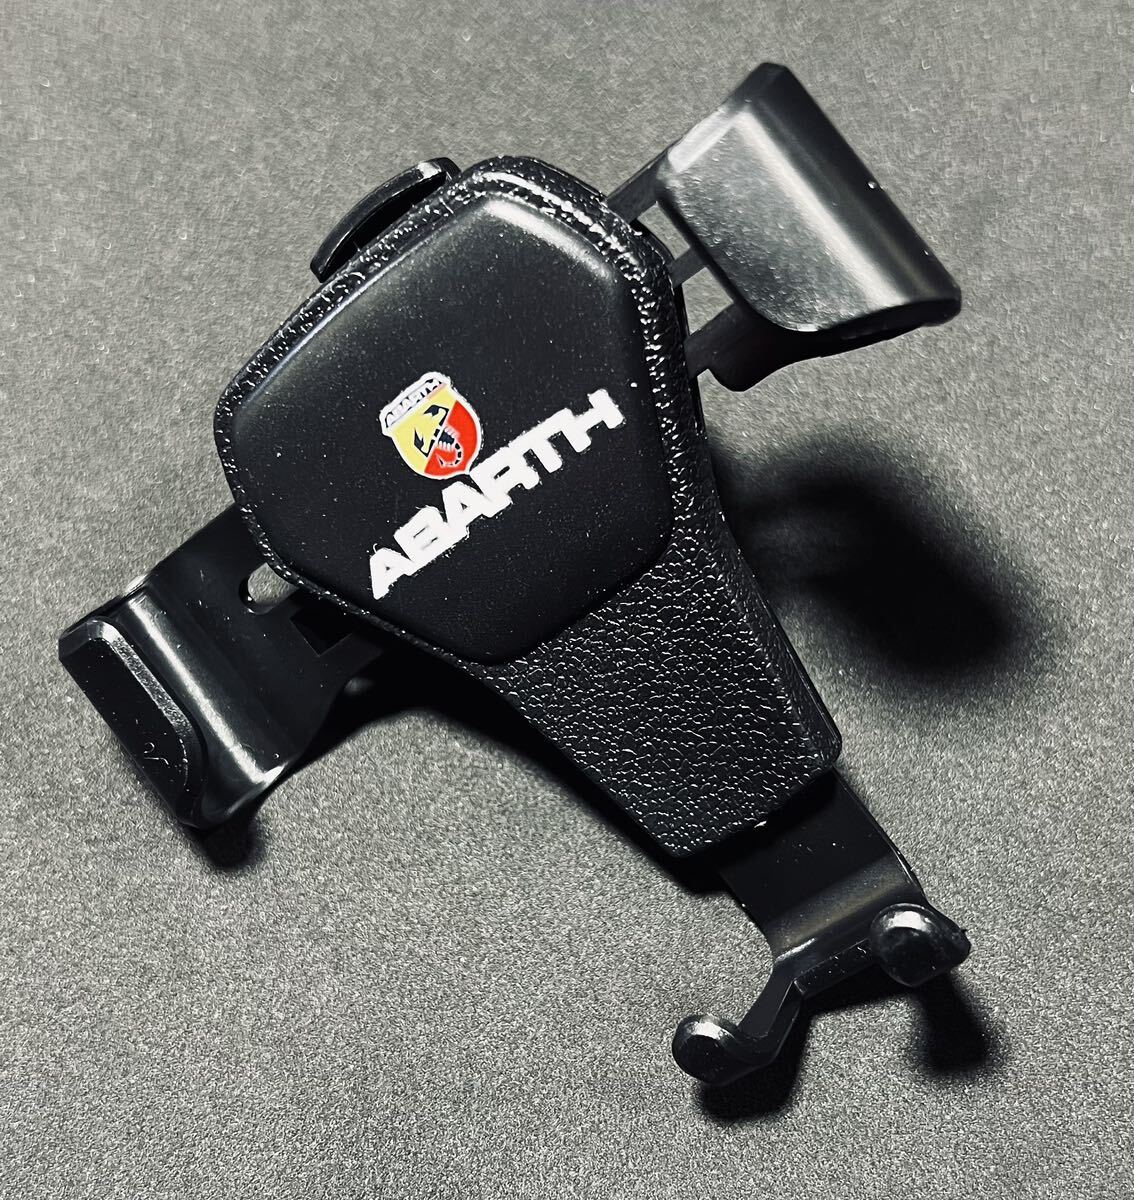 * ABARTH abarth smart phone holder clip type ABS made BLK black *